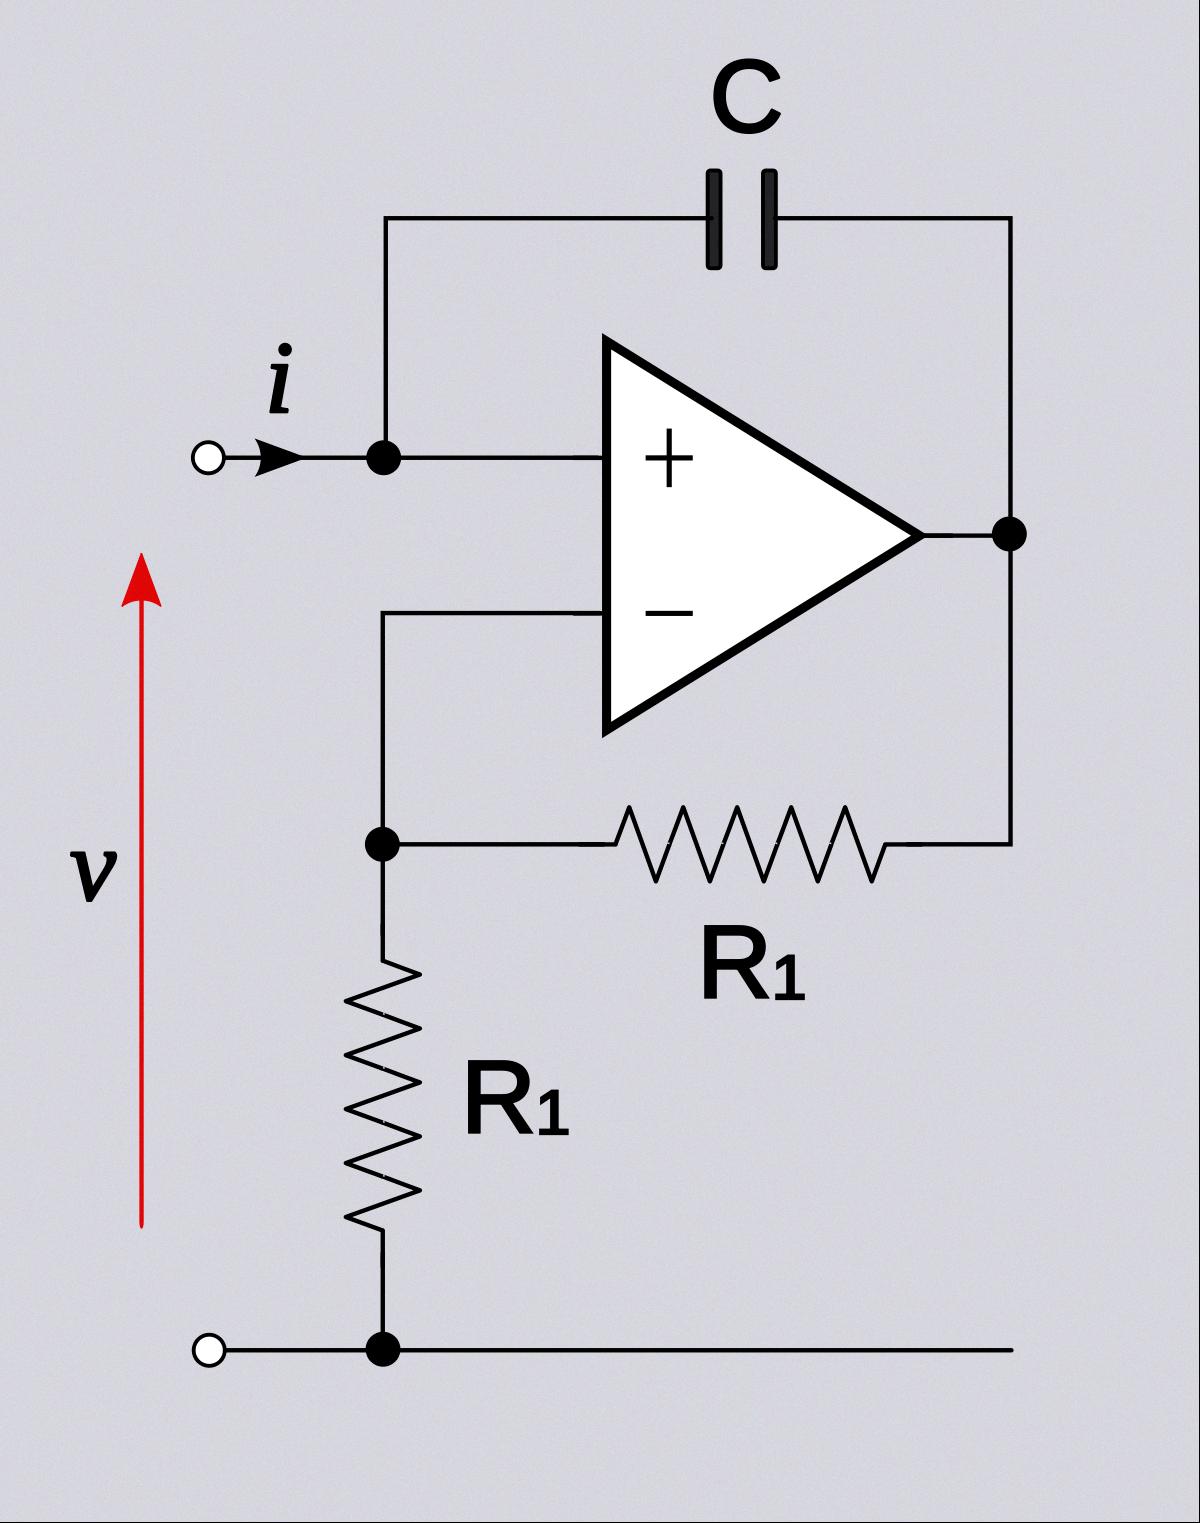 can capacitance be negative